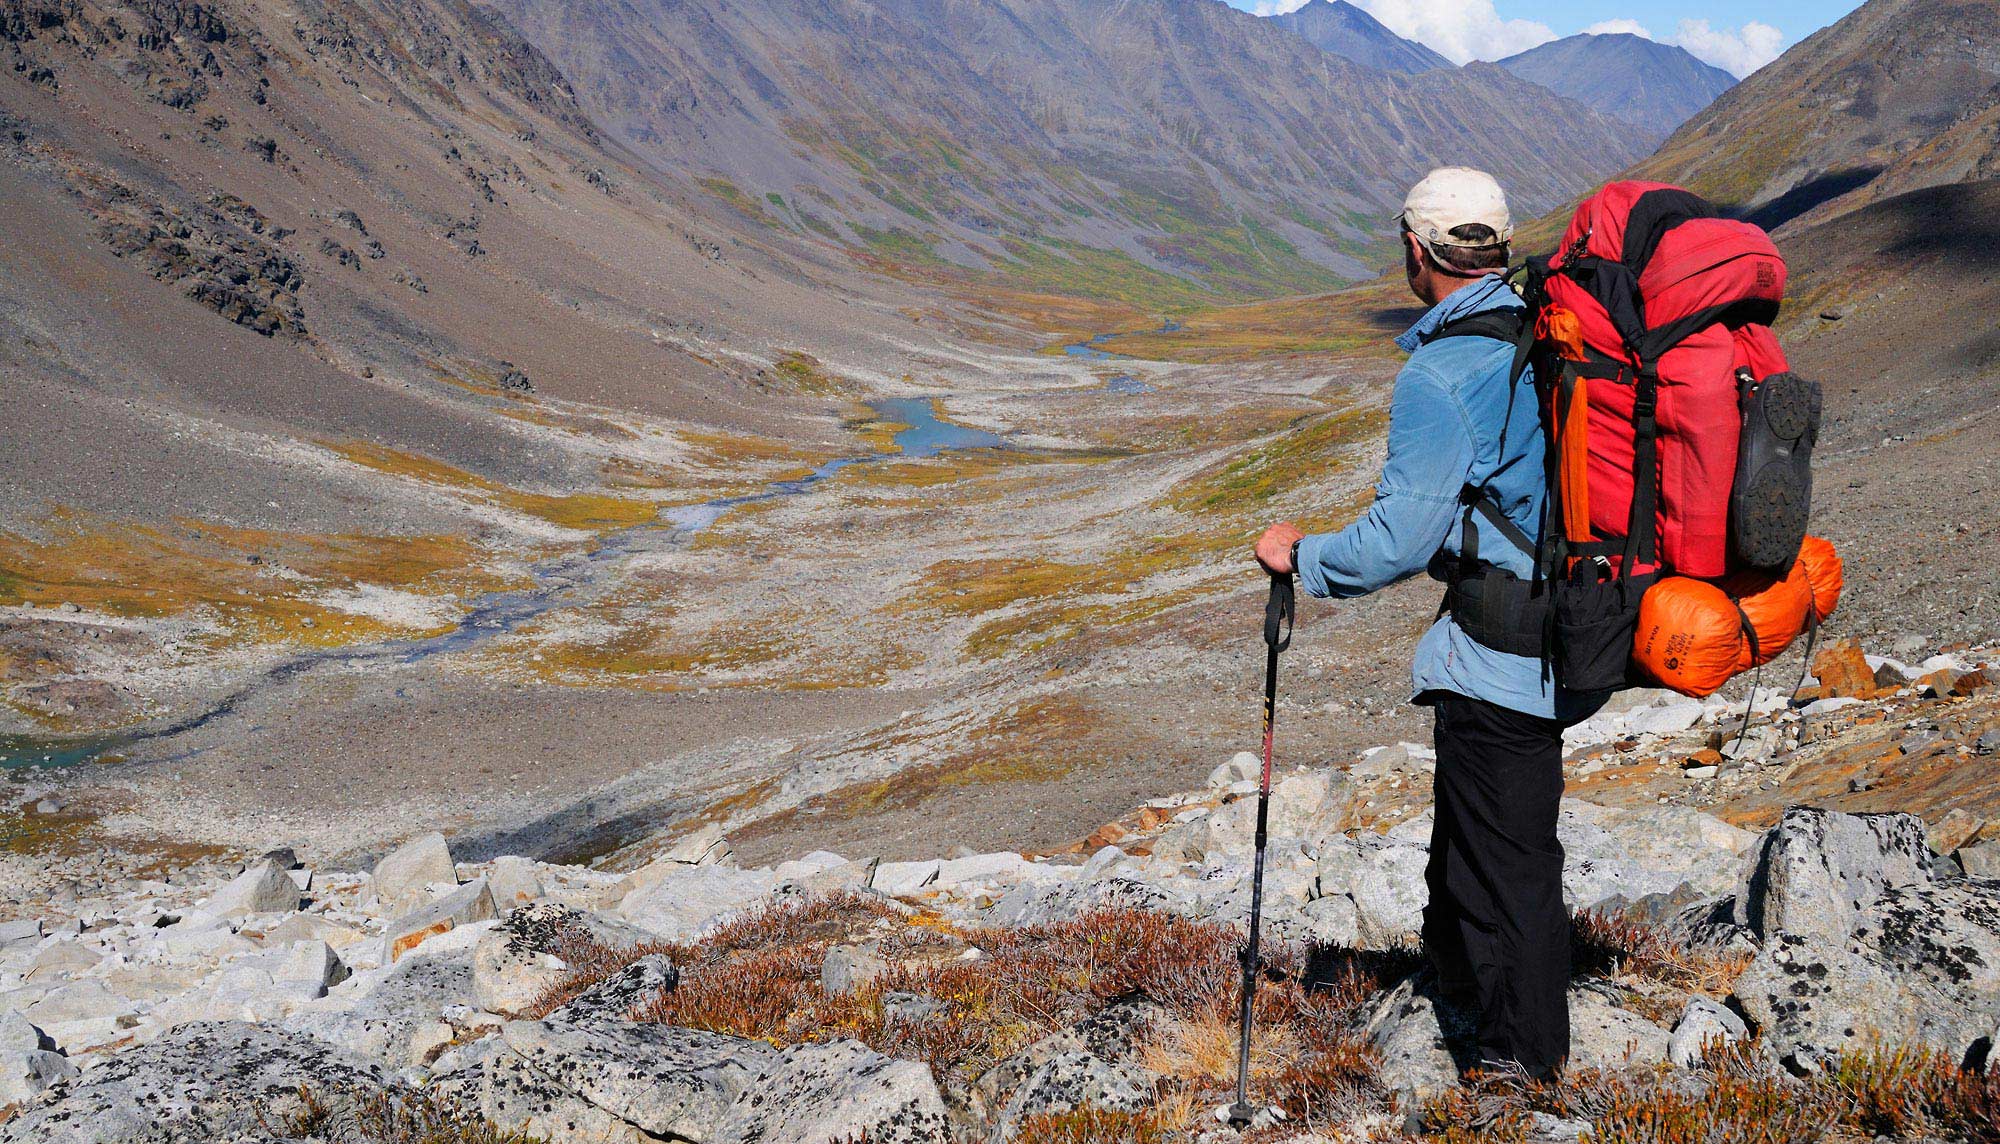 Guided Alaska ecotours and hiking trips Hiking Wrangell - St. Elias National Park